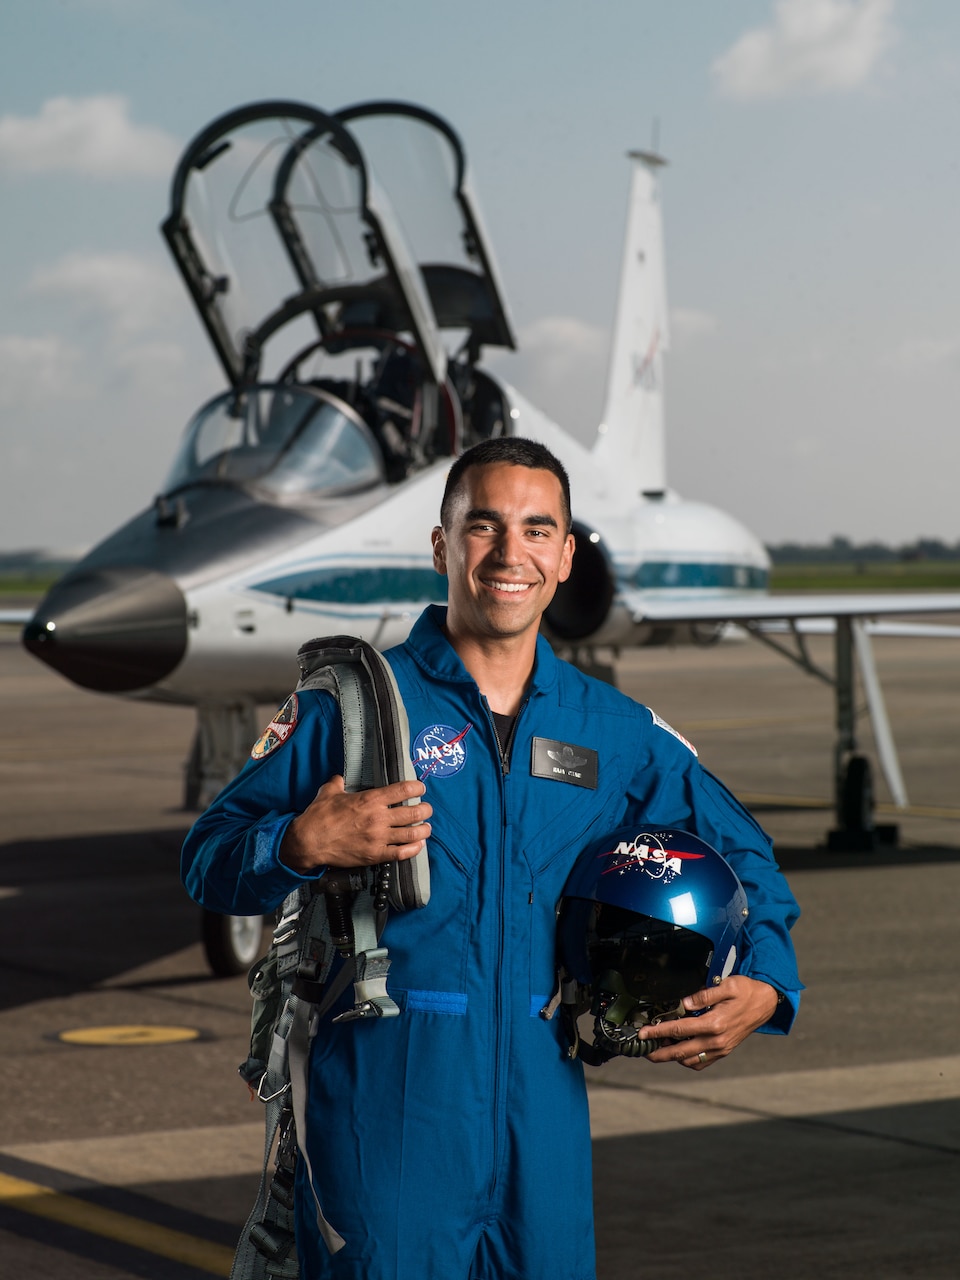 Air Force Lt. Col. Raja Chari stands in front of an NASA T-38 Talon supersonic trainer aircraft at Ellington Field in Houston, Texas, June 6, 2017. Chari has been selected to join the 2017 NASA Astronaut Candidate Class. NASA photo by Robert Markowitz
